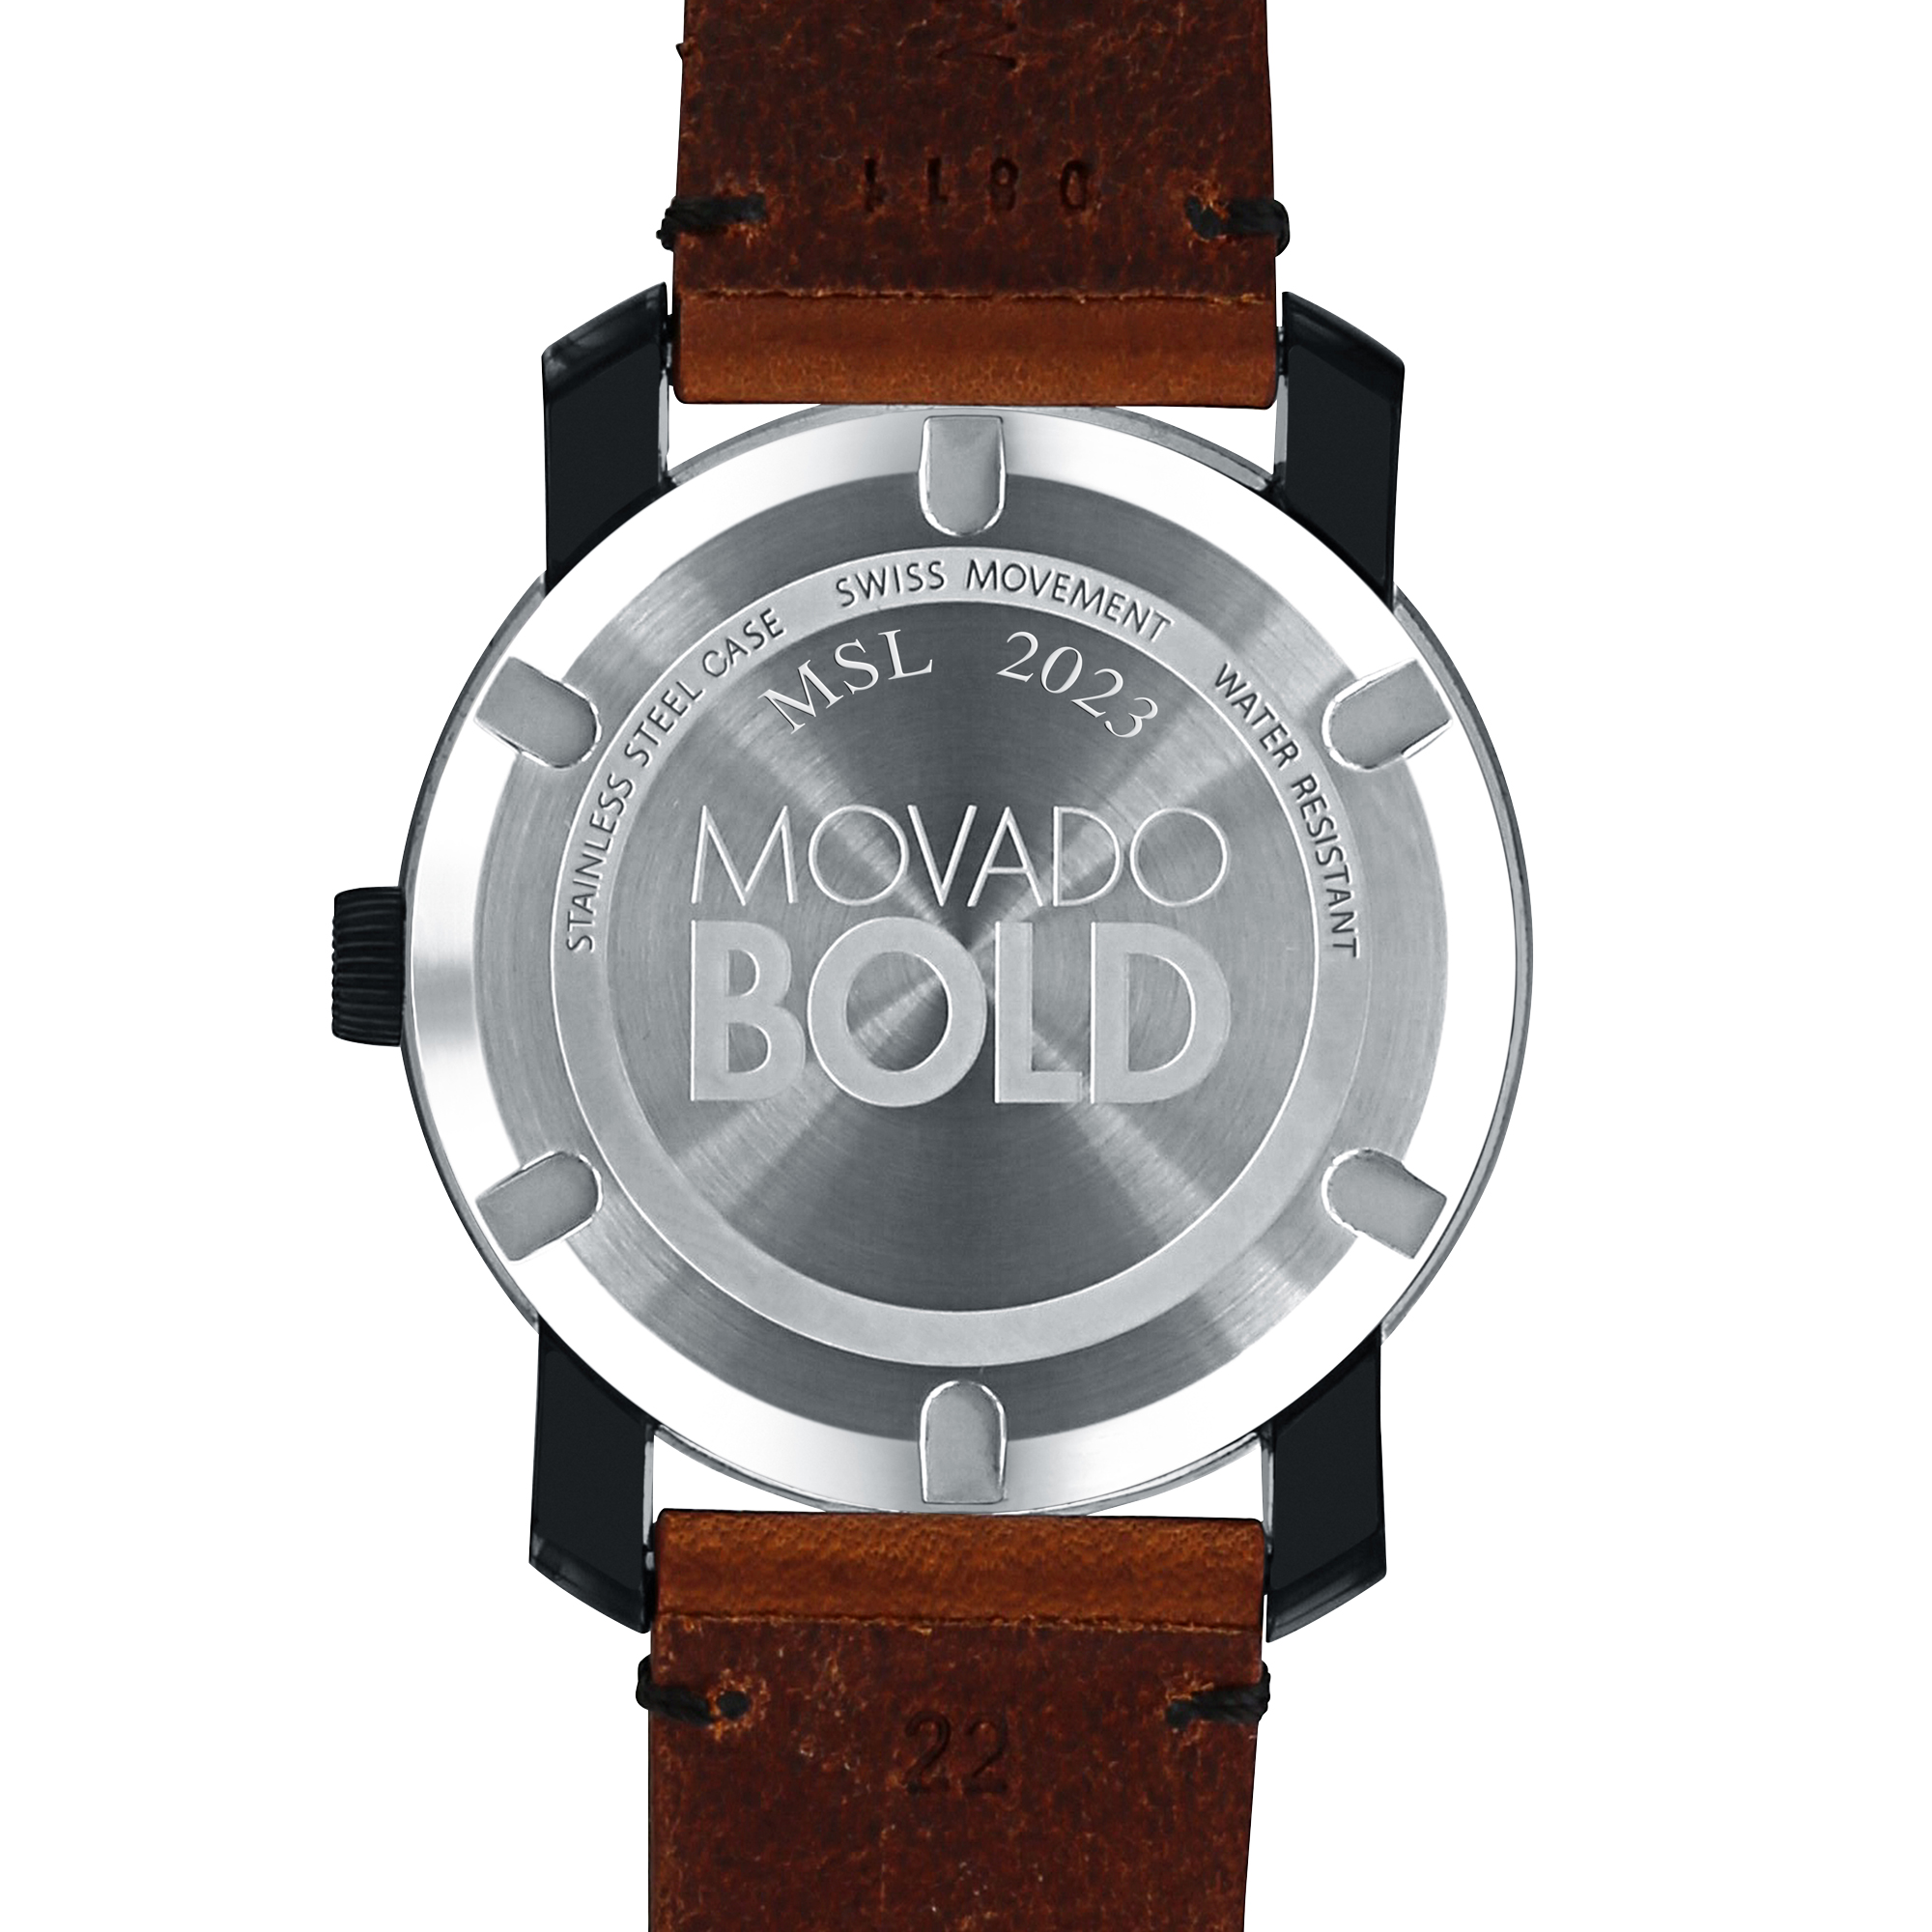 Fairfield University Men's Movado BOLD with Brown Leather Strap - Image 3